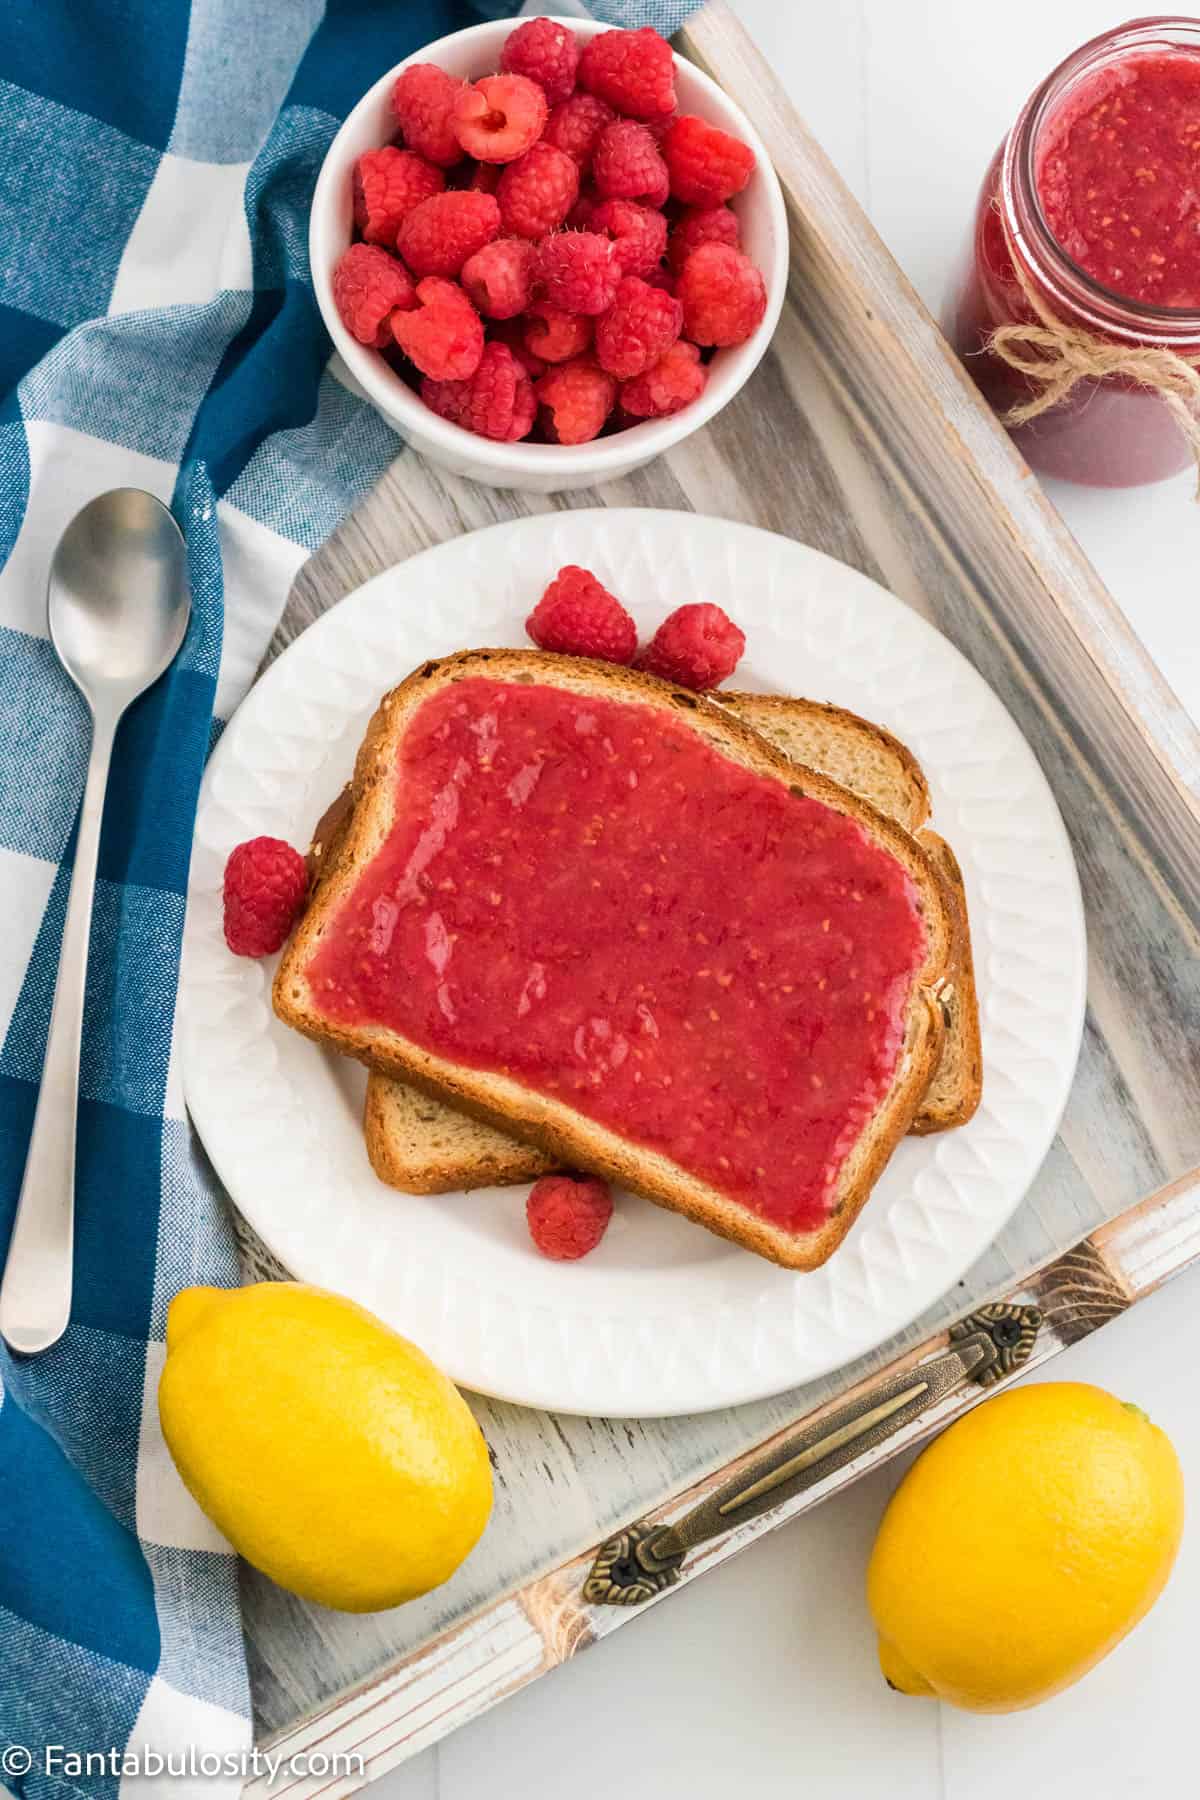 Vibrant red raspberry jam is spread on multigrain toast on a white plate. It is surround by lemons, a decorative gingham towel, fresh raspberries and a jar of jam